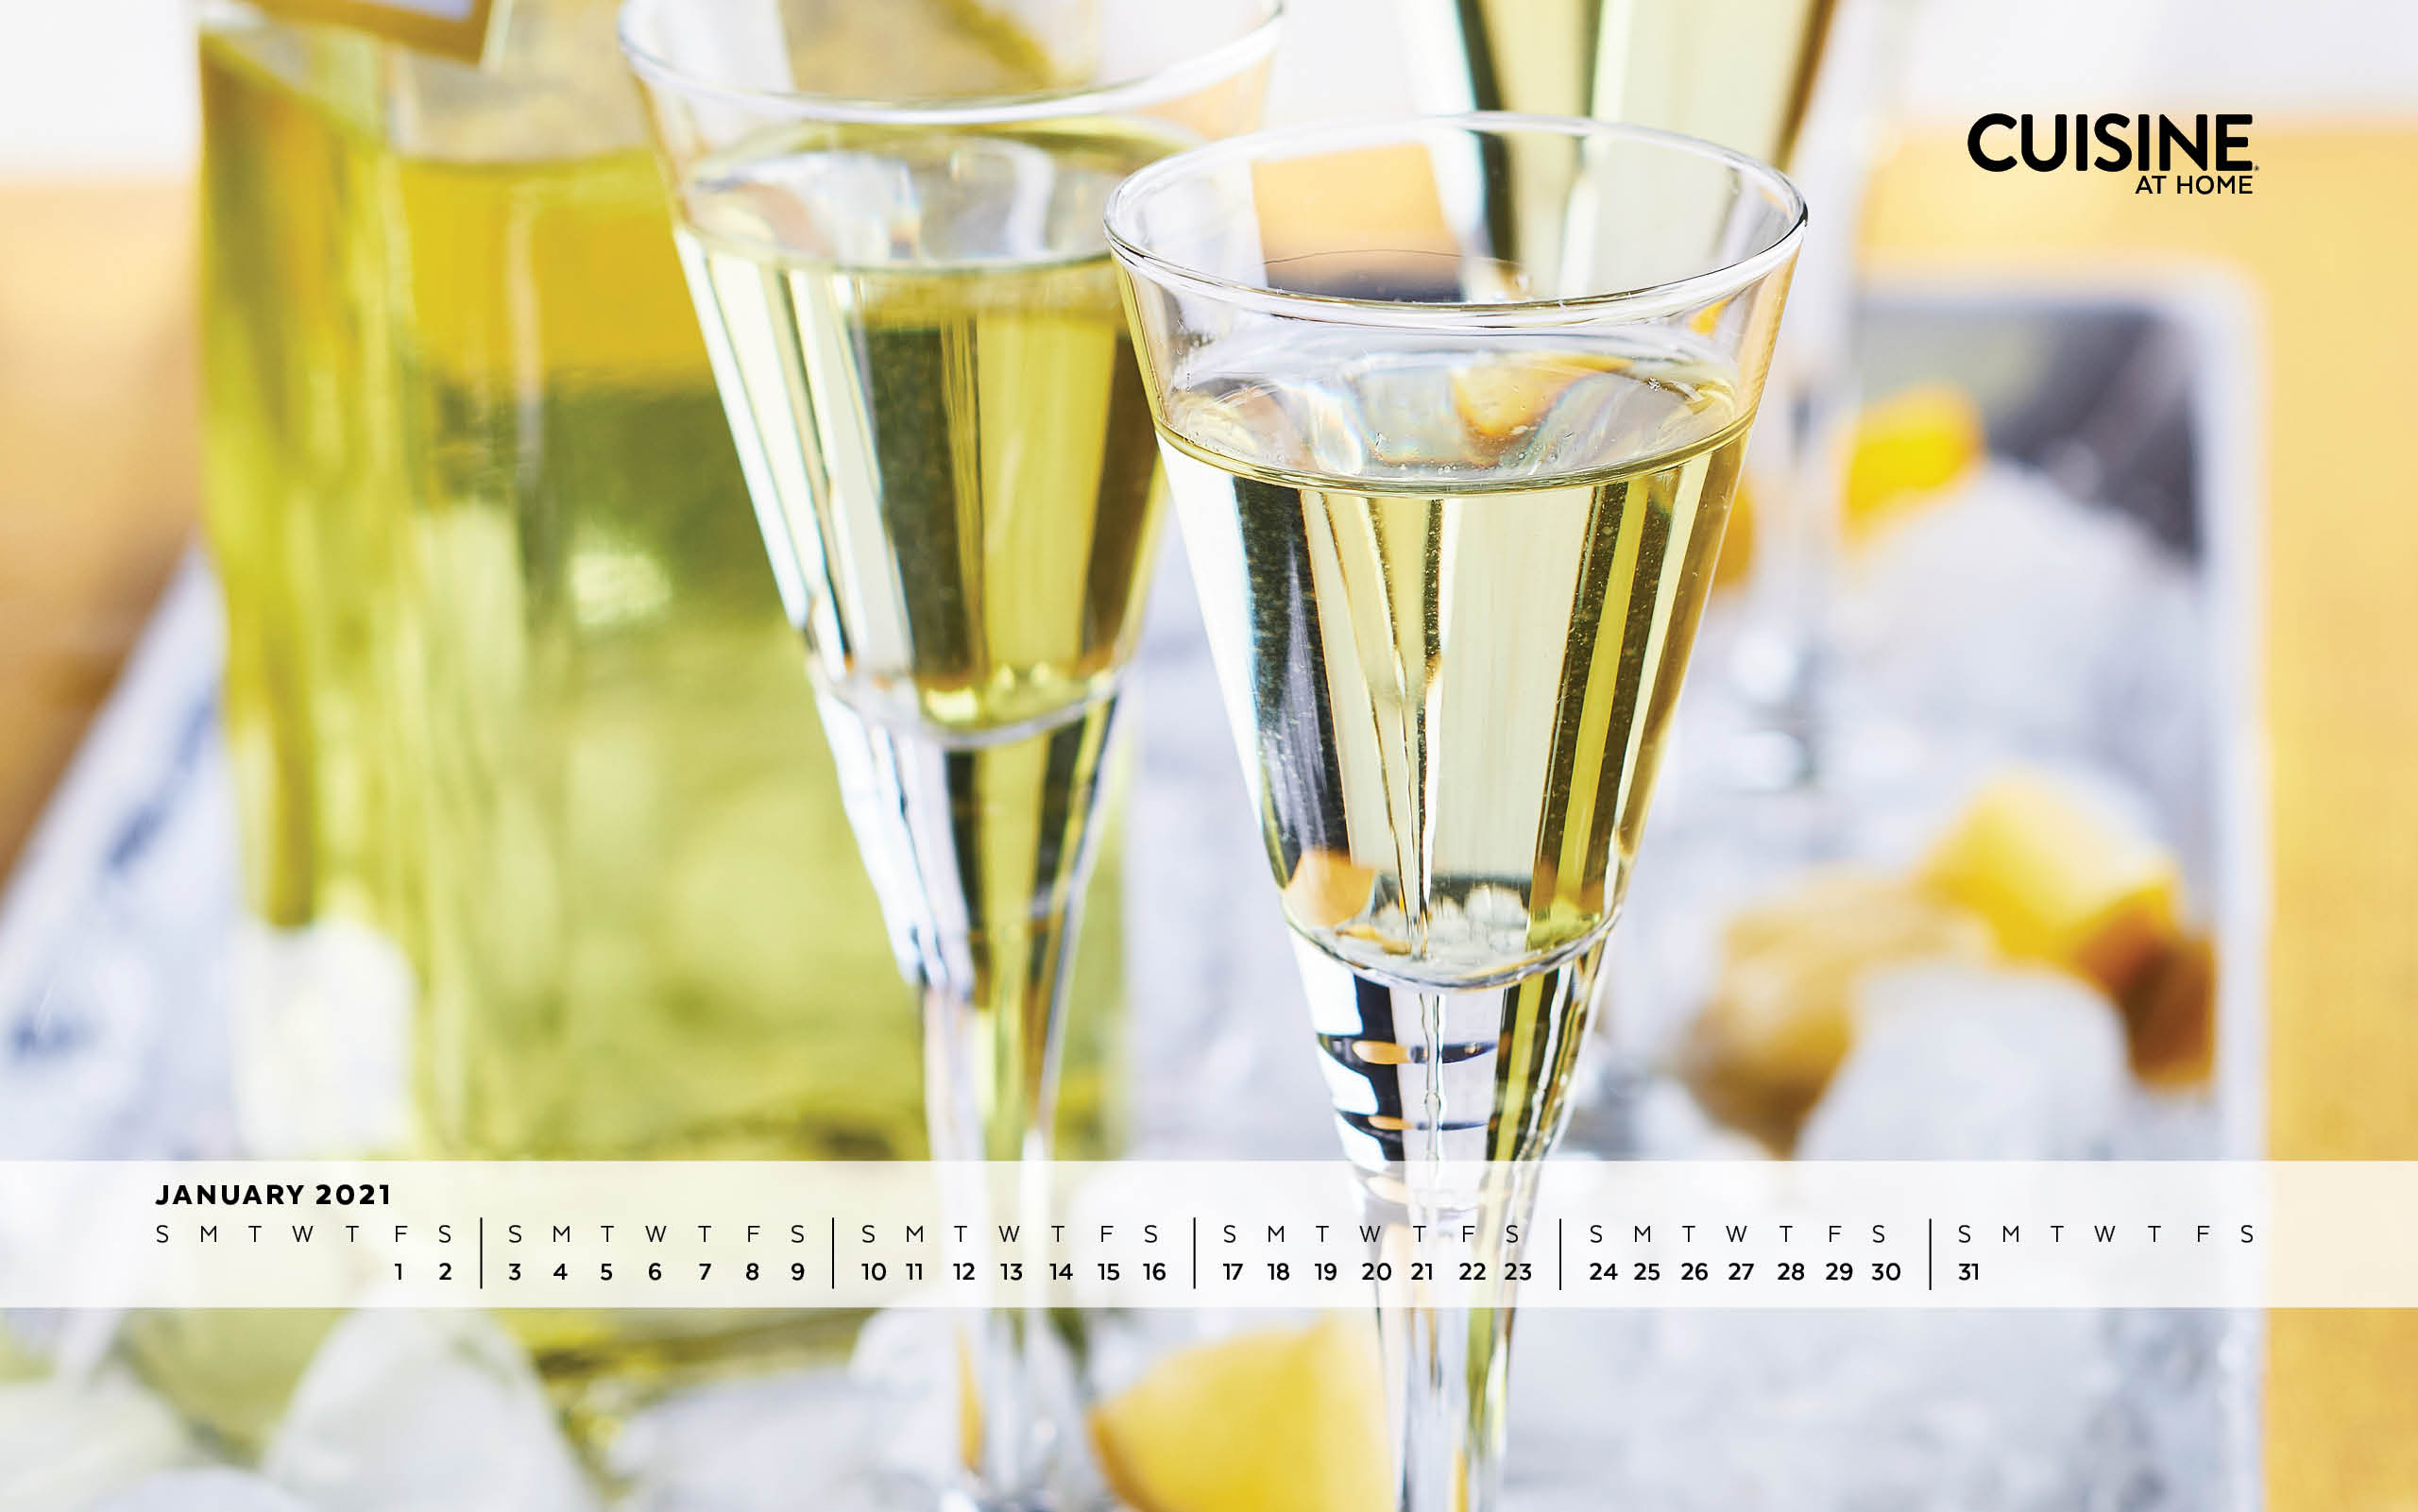 January New Years champagne desktop wallpaper aesthetic with calendar from Cuisine at Home